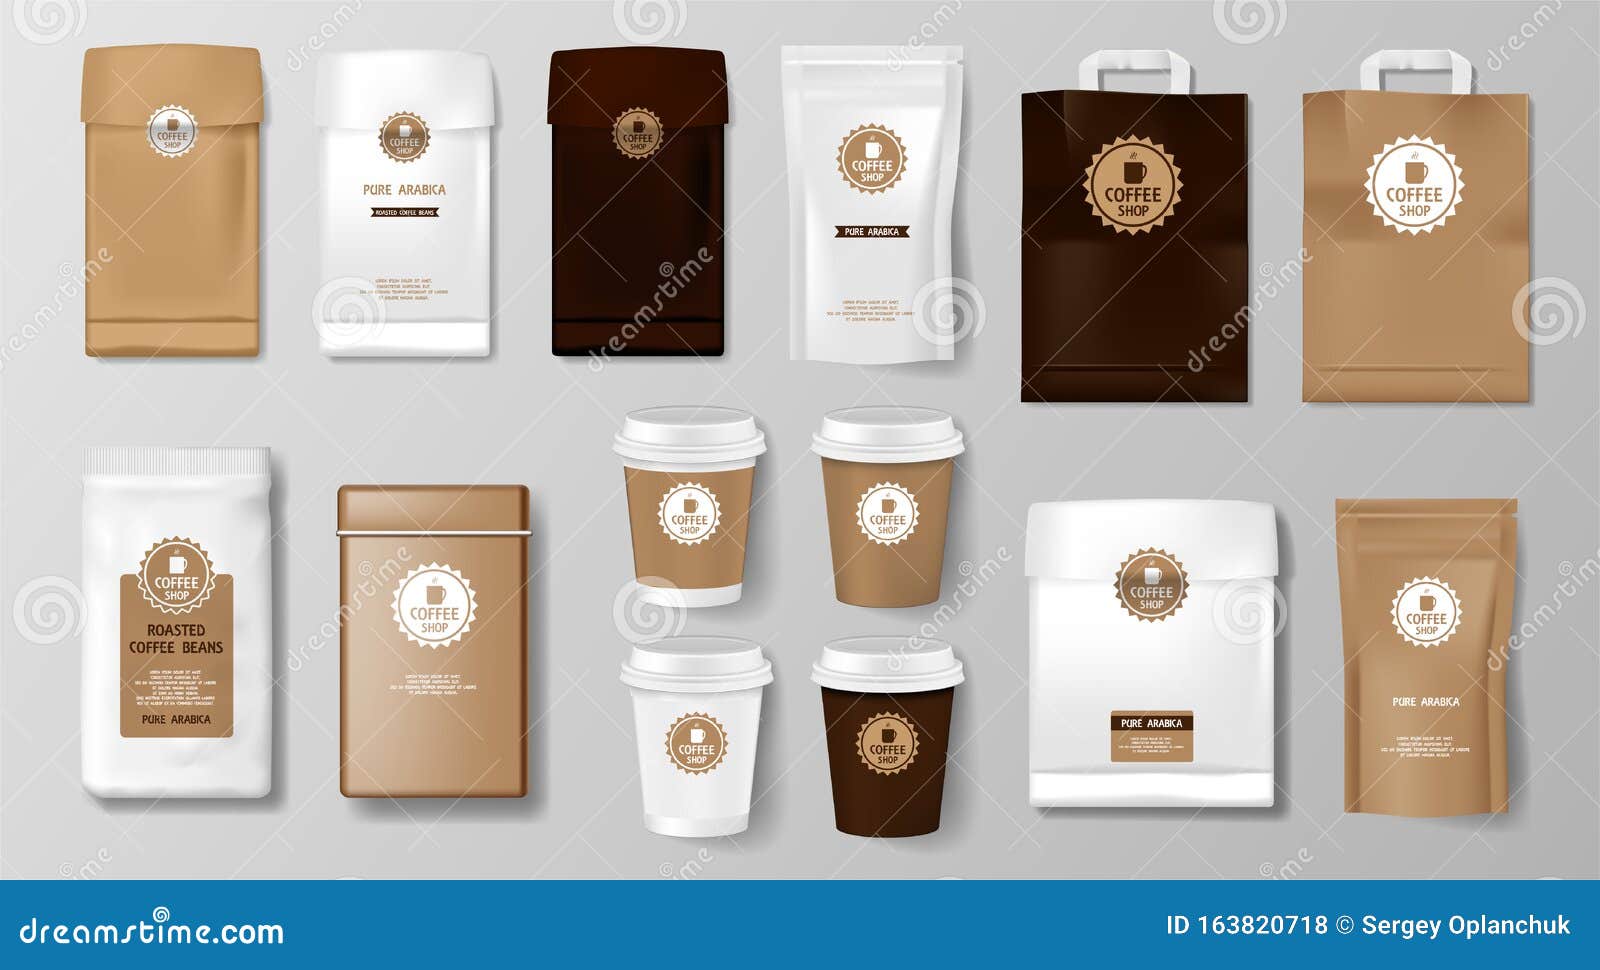 Download Set Of Realistic Coffee Packaging Mockup For Coffee Shop Cafe Restaurant Corporate Identity Food Package Hot Drink Stock Vector Illustration Of Modern Coffee 163820718